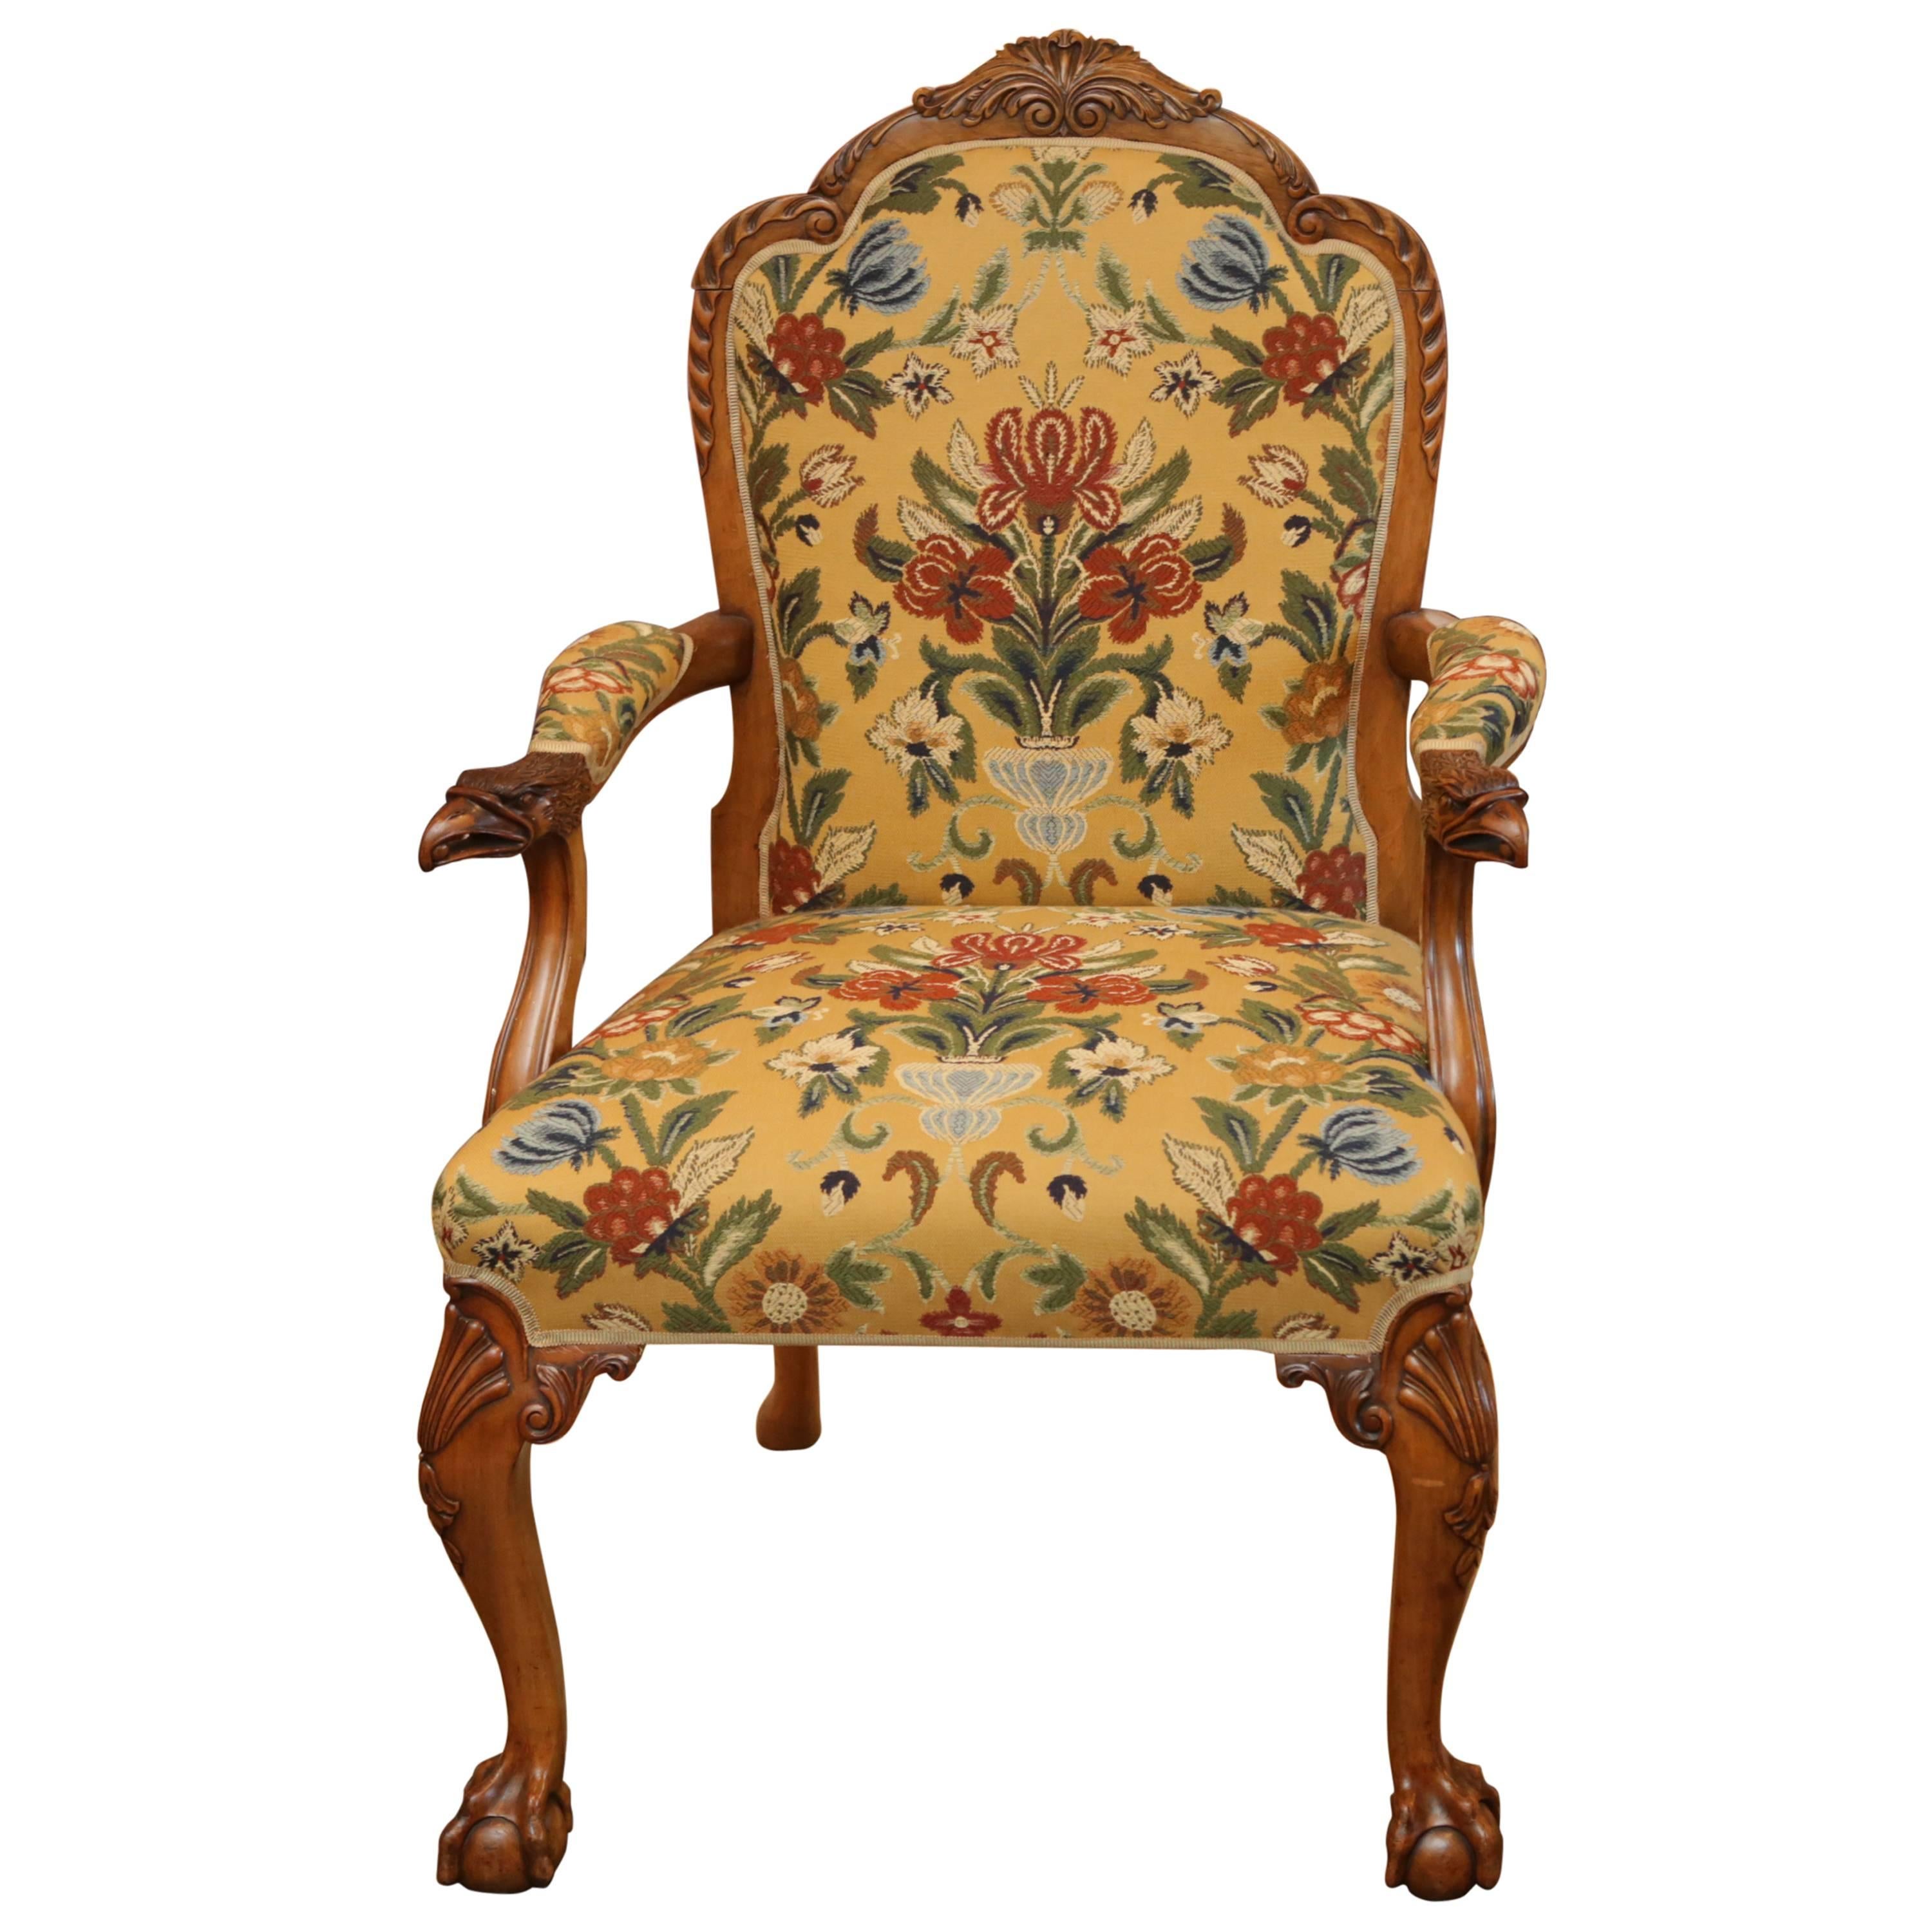 Carved Eagle Armchair with Floral Upholstery